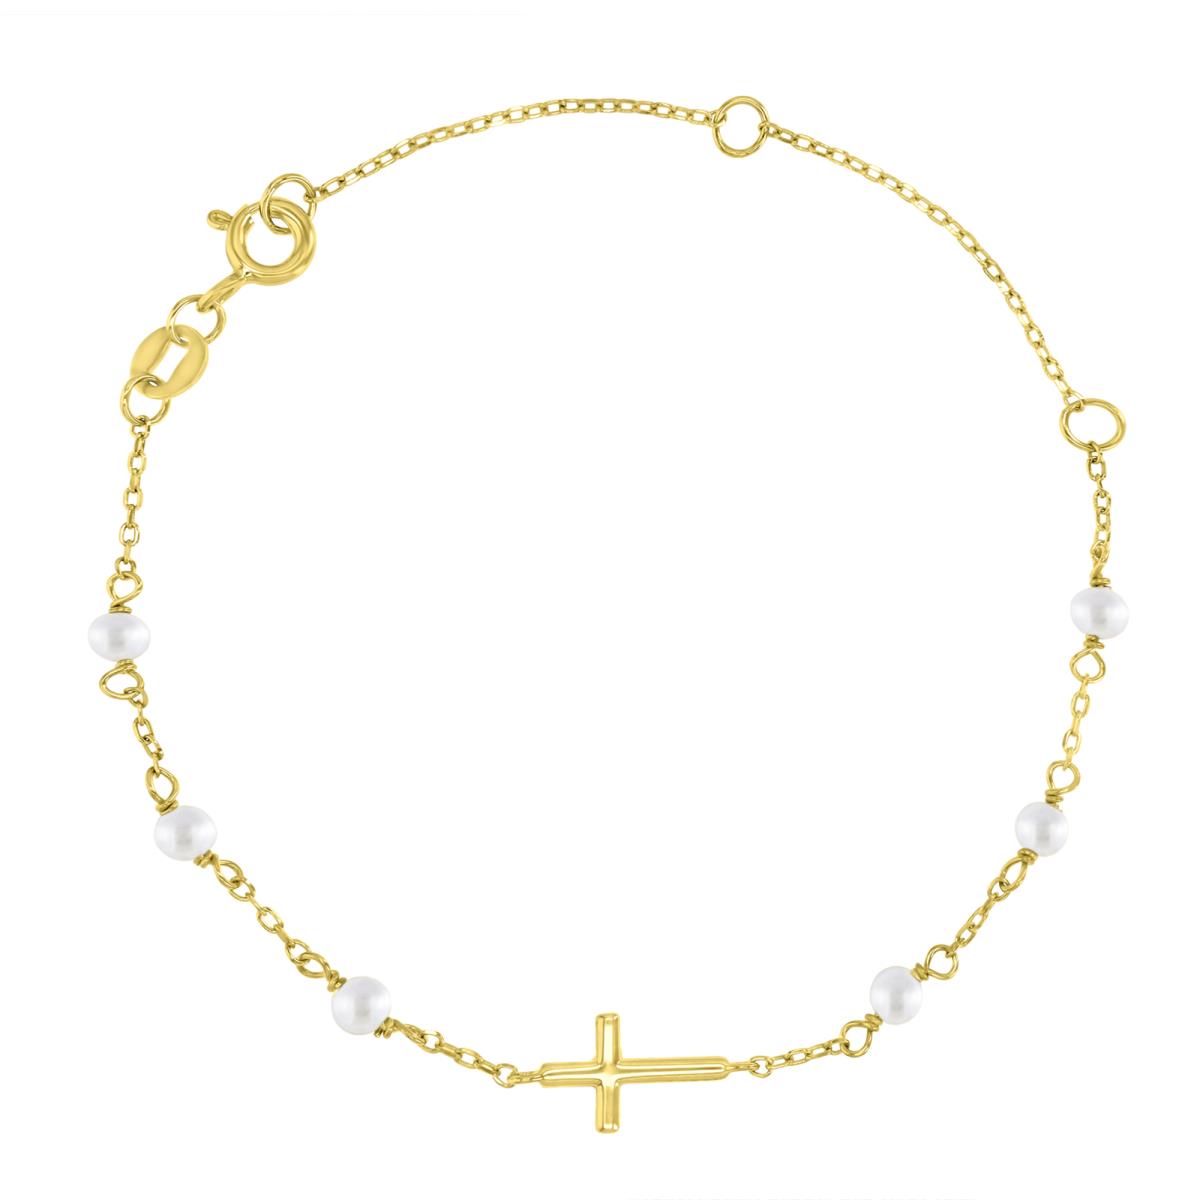 Sterling Silver Yellow 6.5X3MM Polished Cross & White Faux Pearls 9+1" Anklet